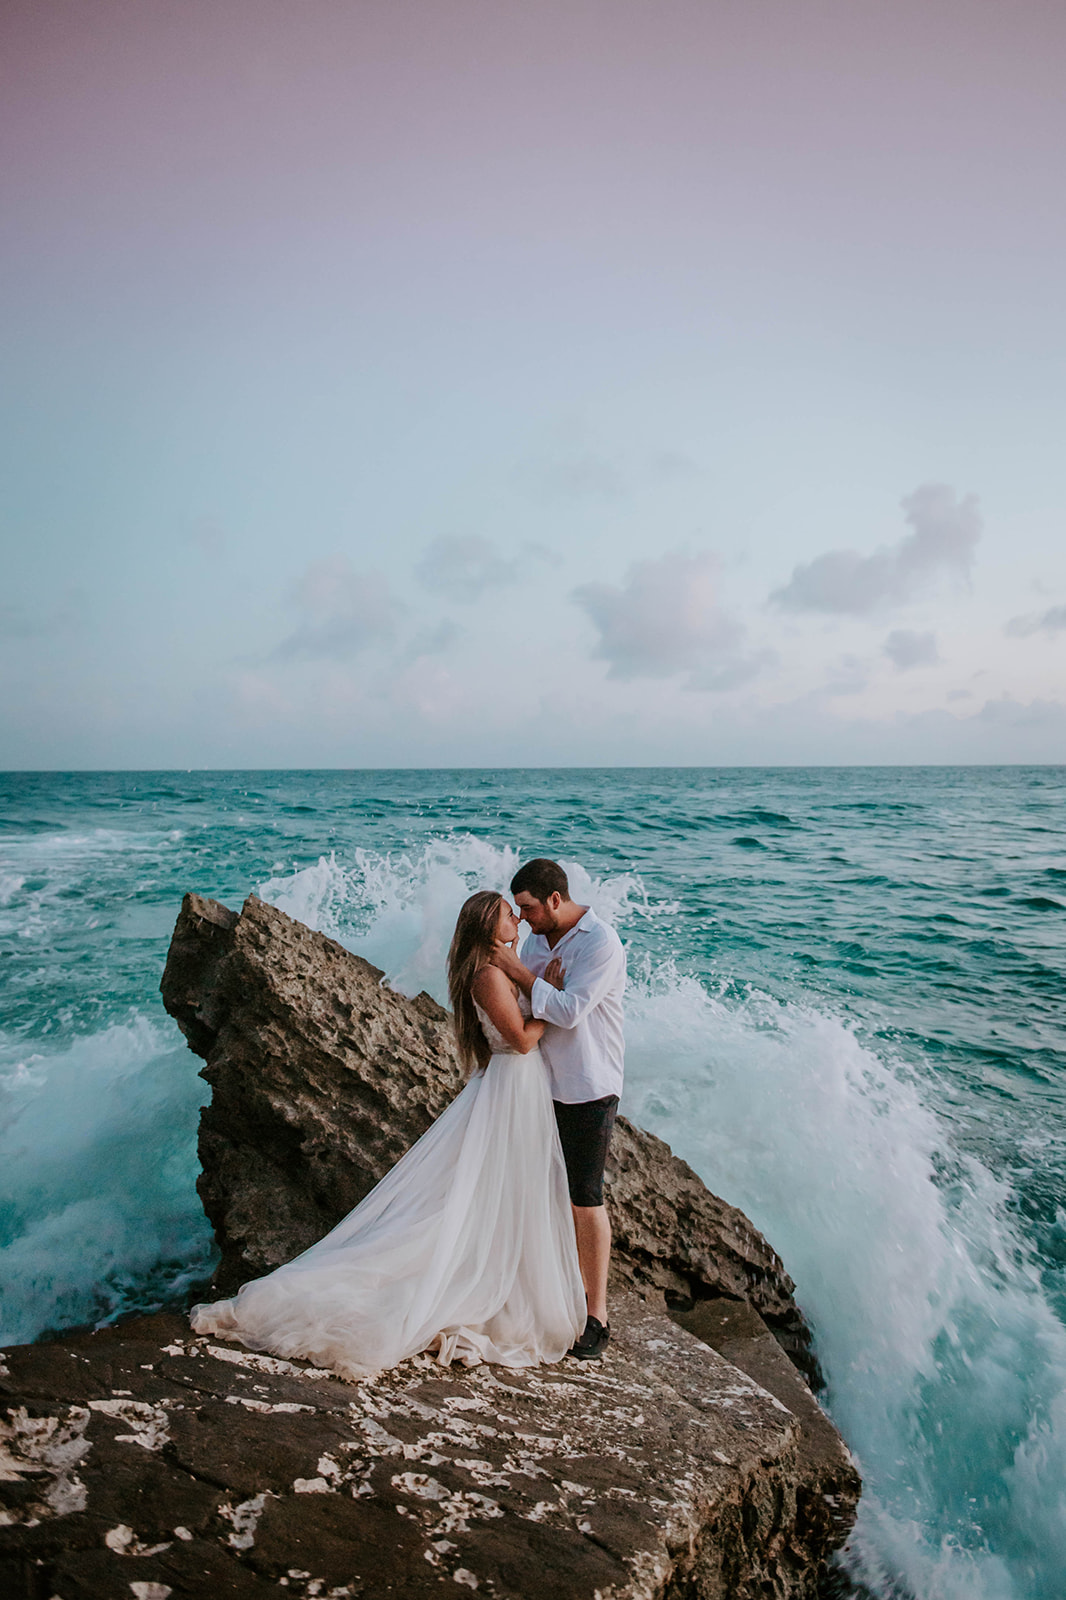 Bride and groom kissing with the carribean sea in the background